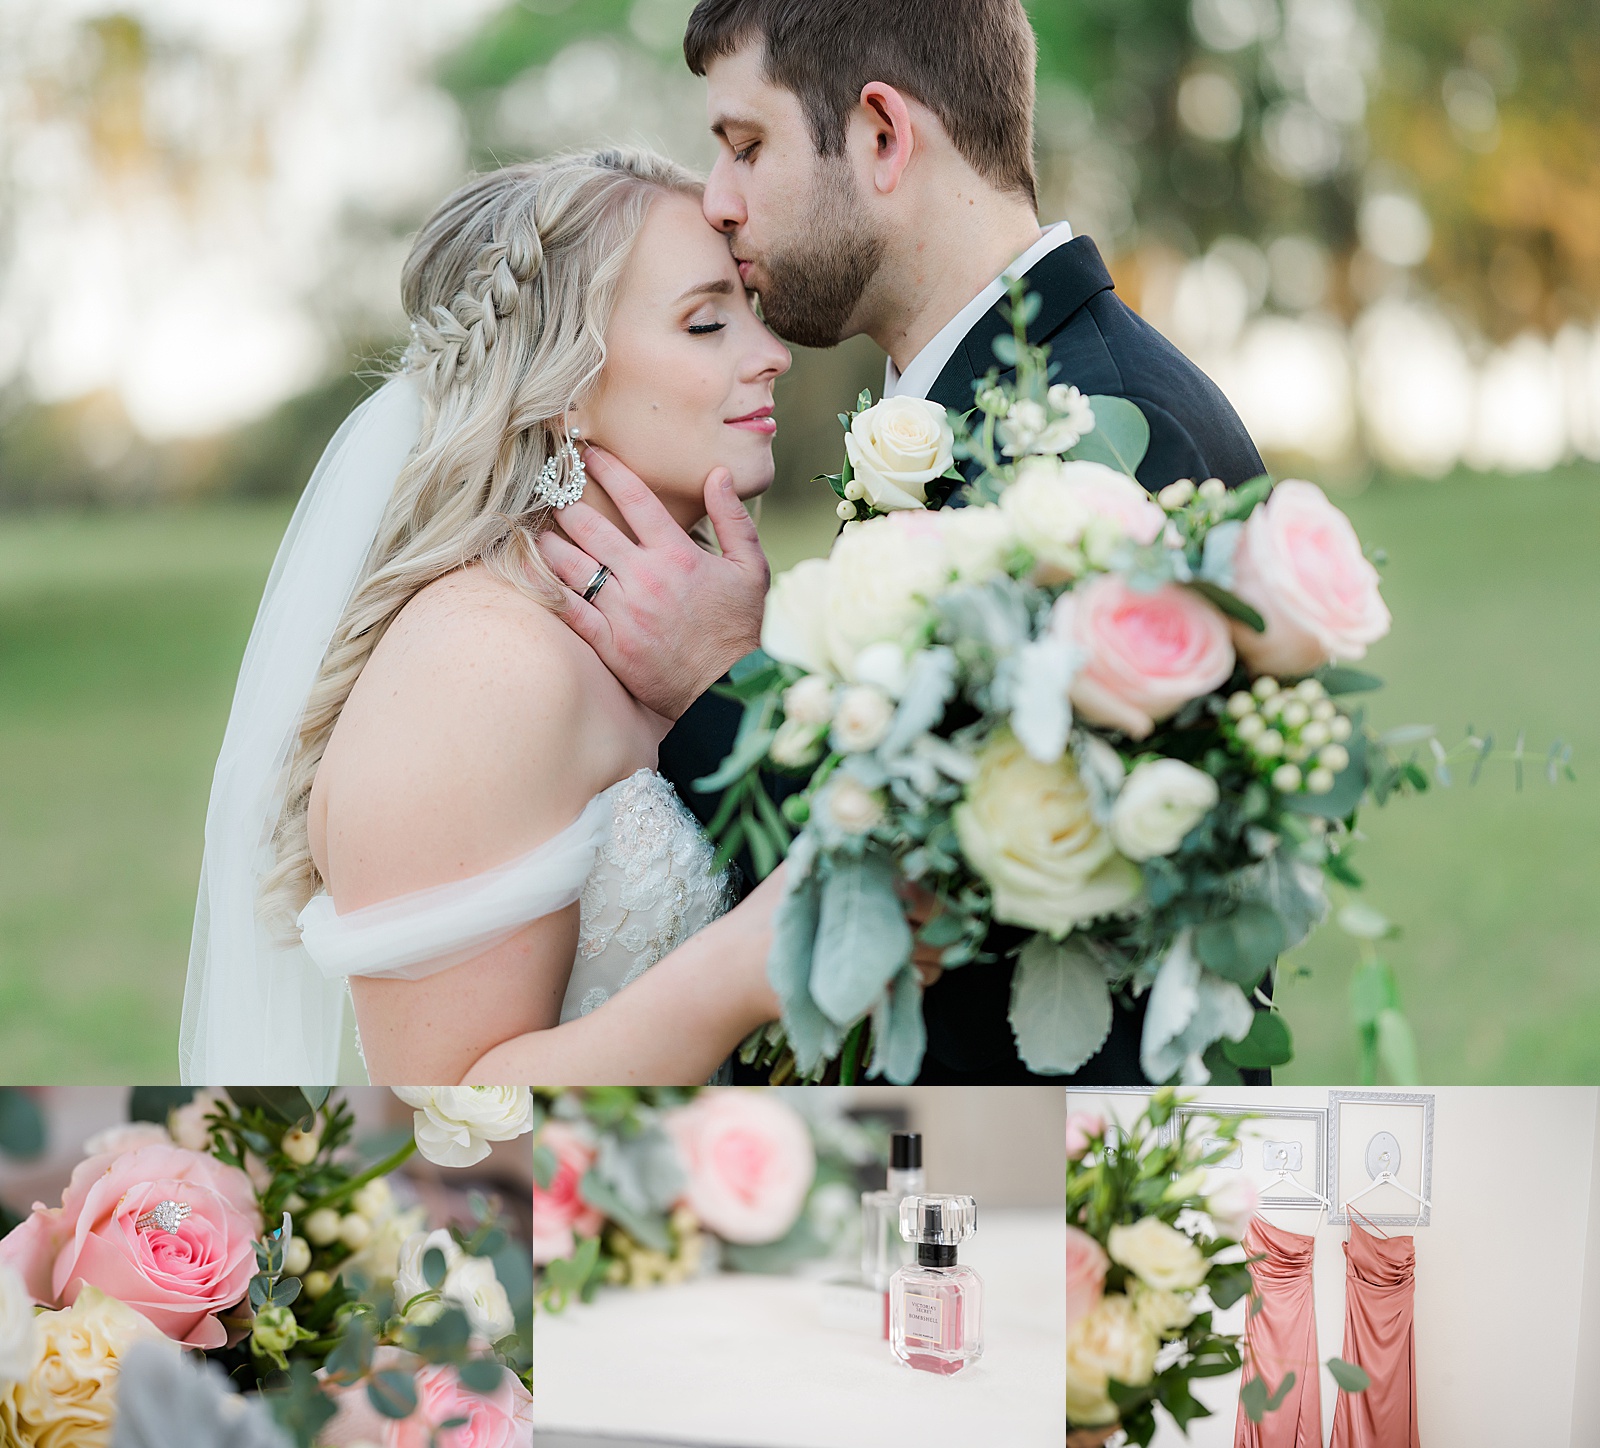 Fairytale Wedding at Valley View with Angela Norton Photography